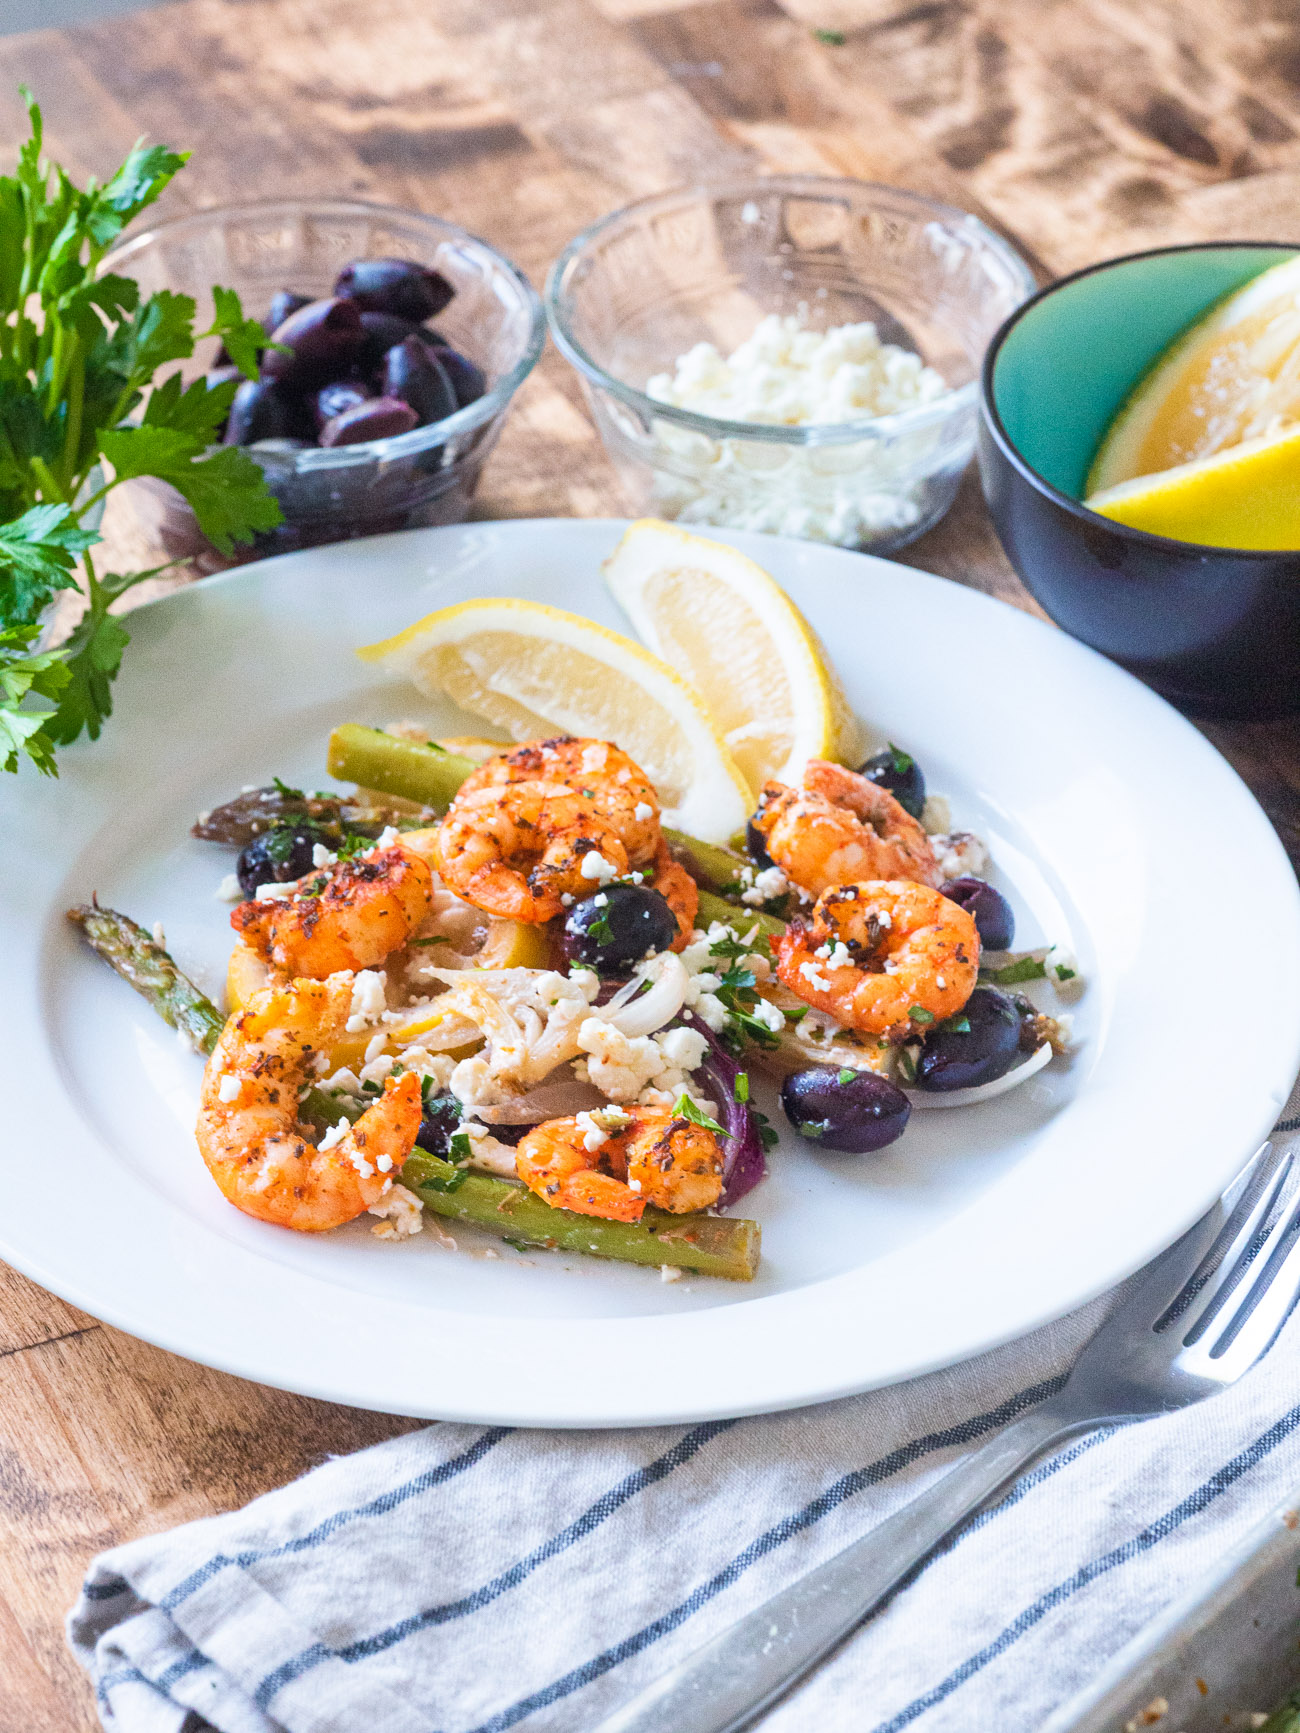 Sheet Pan Mediterranean Shrimp and Vegetables - QUICK and EASY!